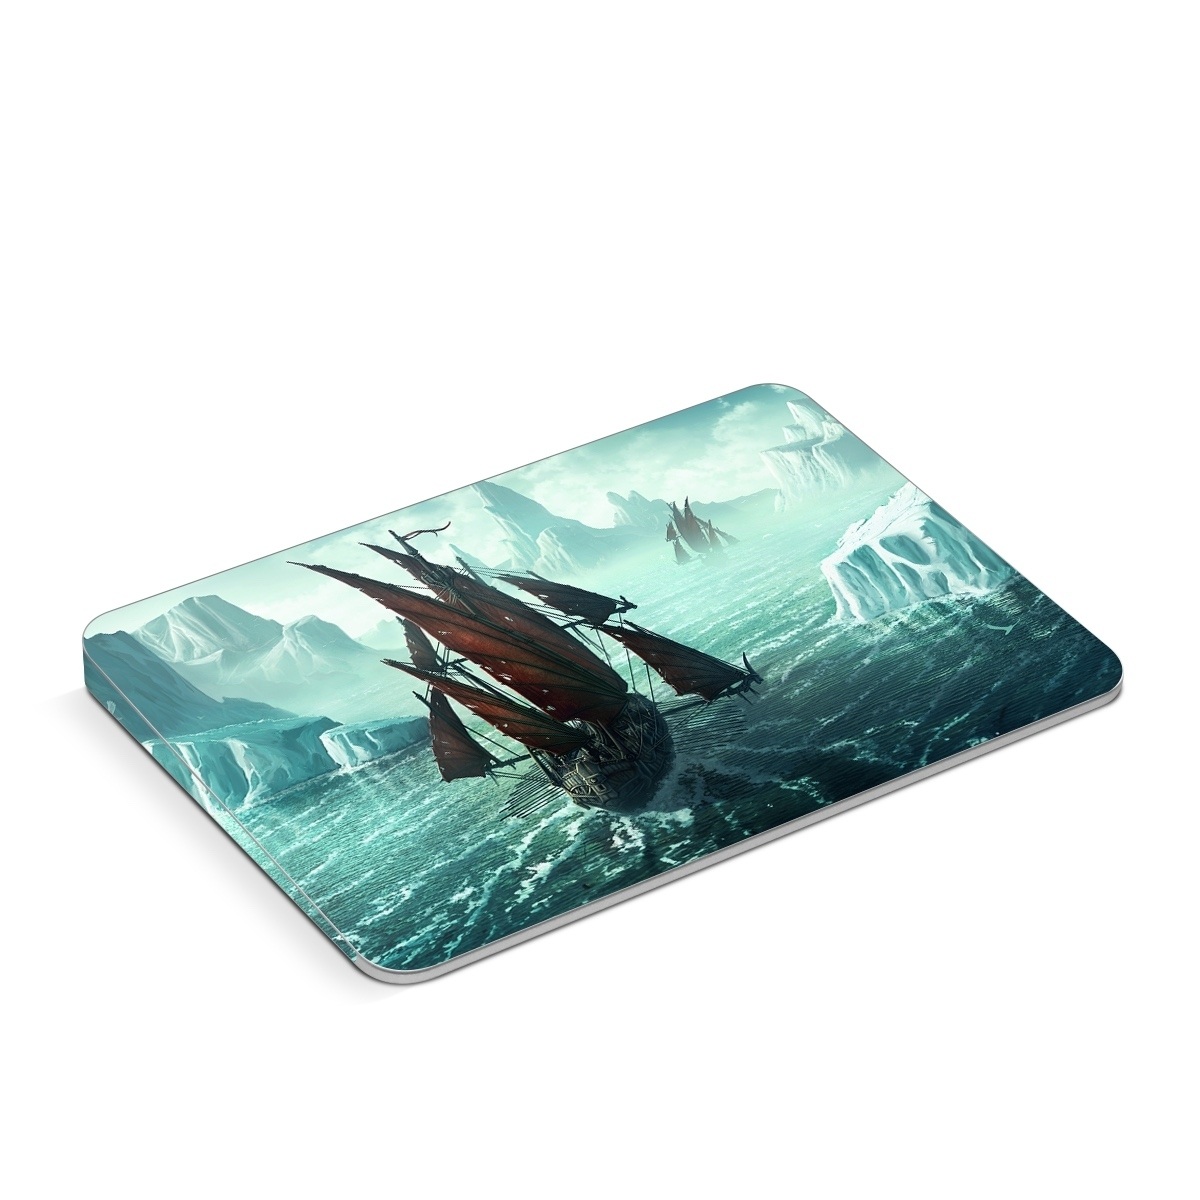 Apple Magic Trackpad Skin design of Cg artwork, Vehicle, Ghost ship, Manila galleon, Fluyt, Adventure game, First-rate, Sailing ship, Mythology, Strategy video game, with gray, black, blue, green, white colors